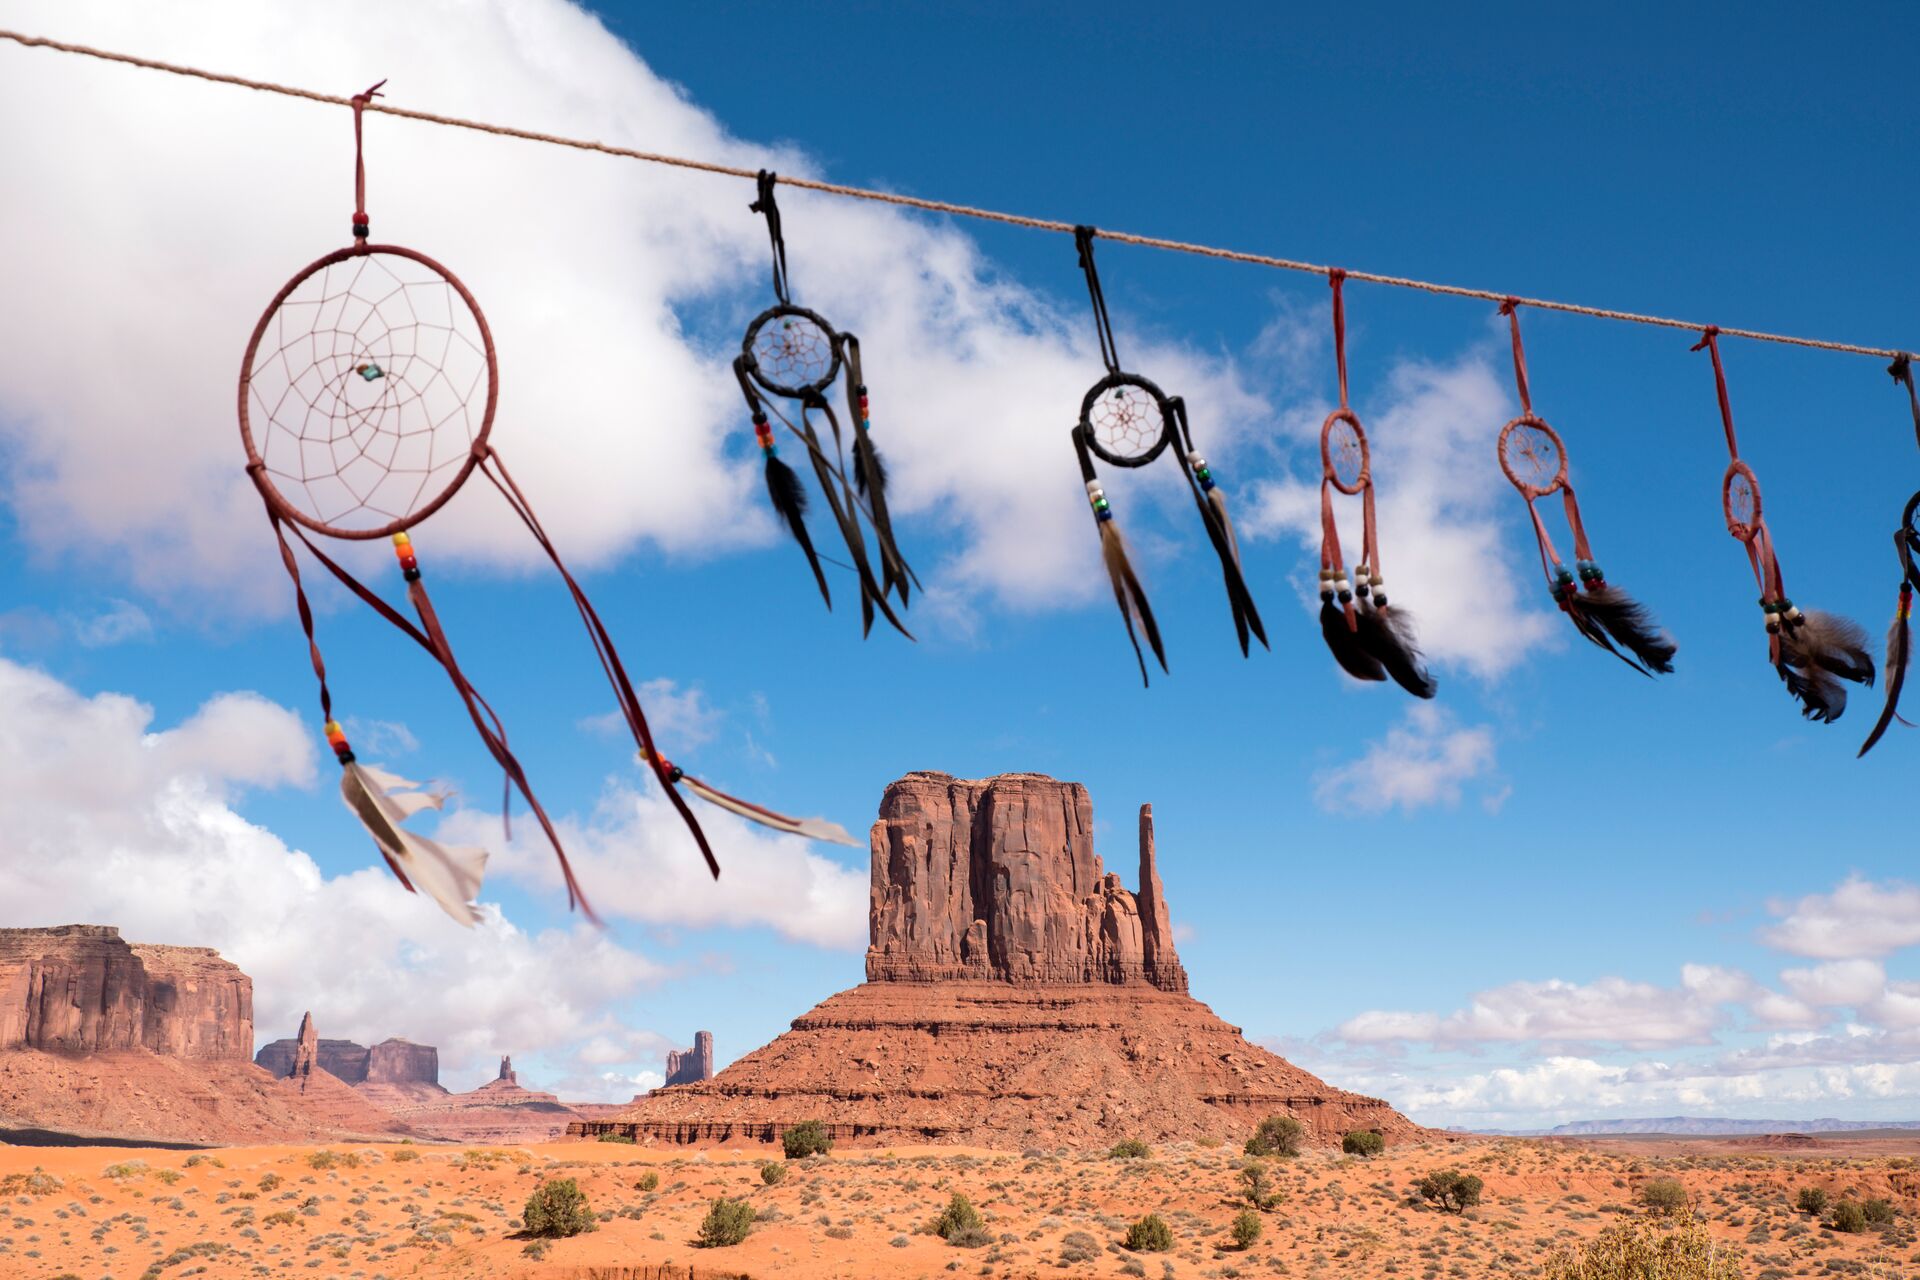 Image of West Mitten Butte in Monument Valley, blue sky with clouds, in the foreground dreamcatchers hanging from a line